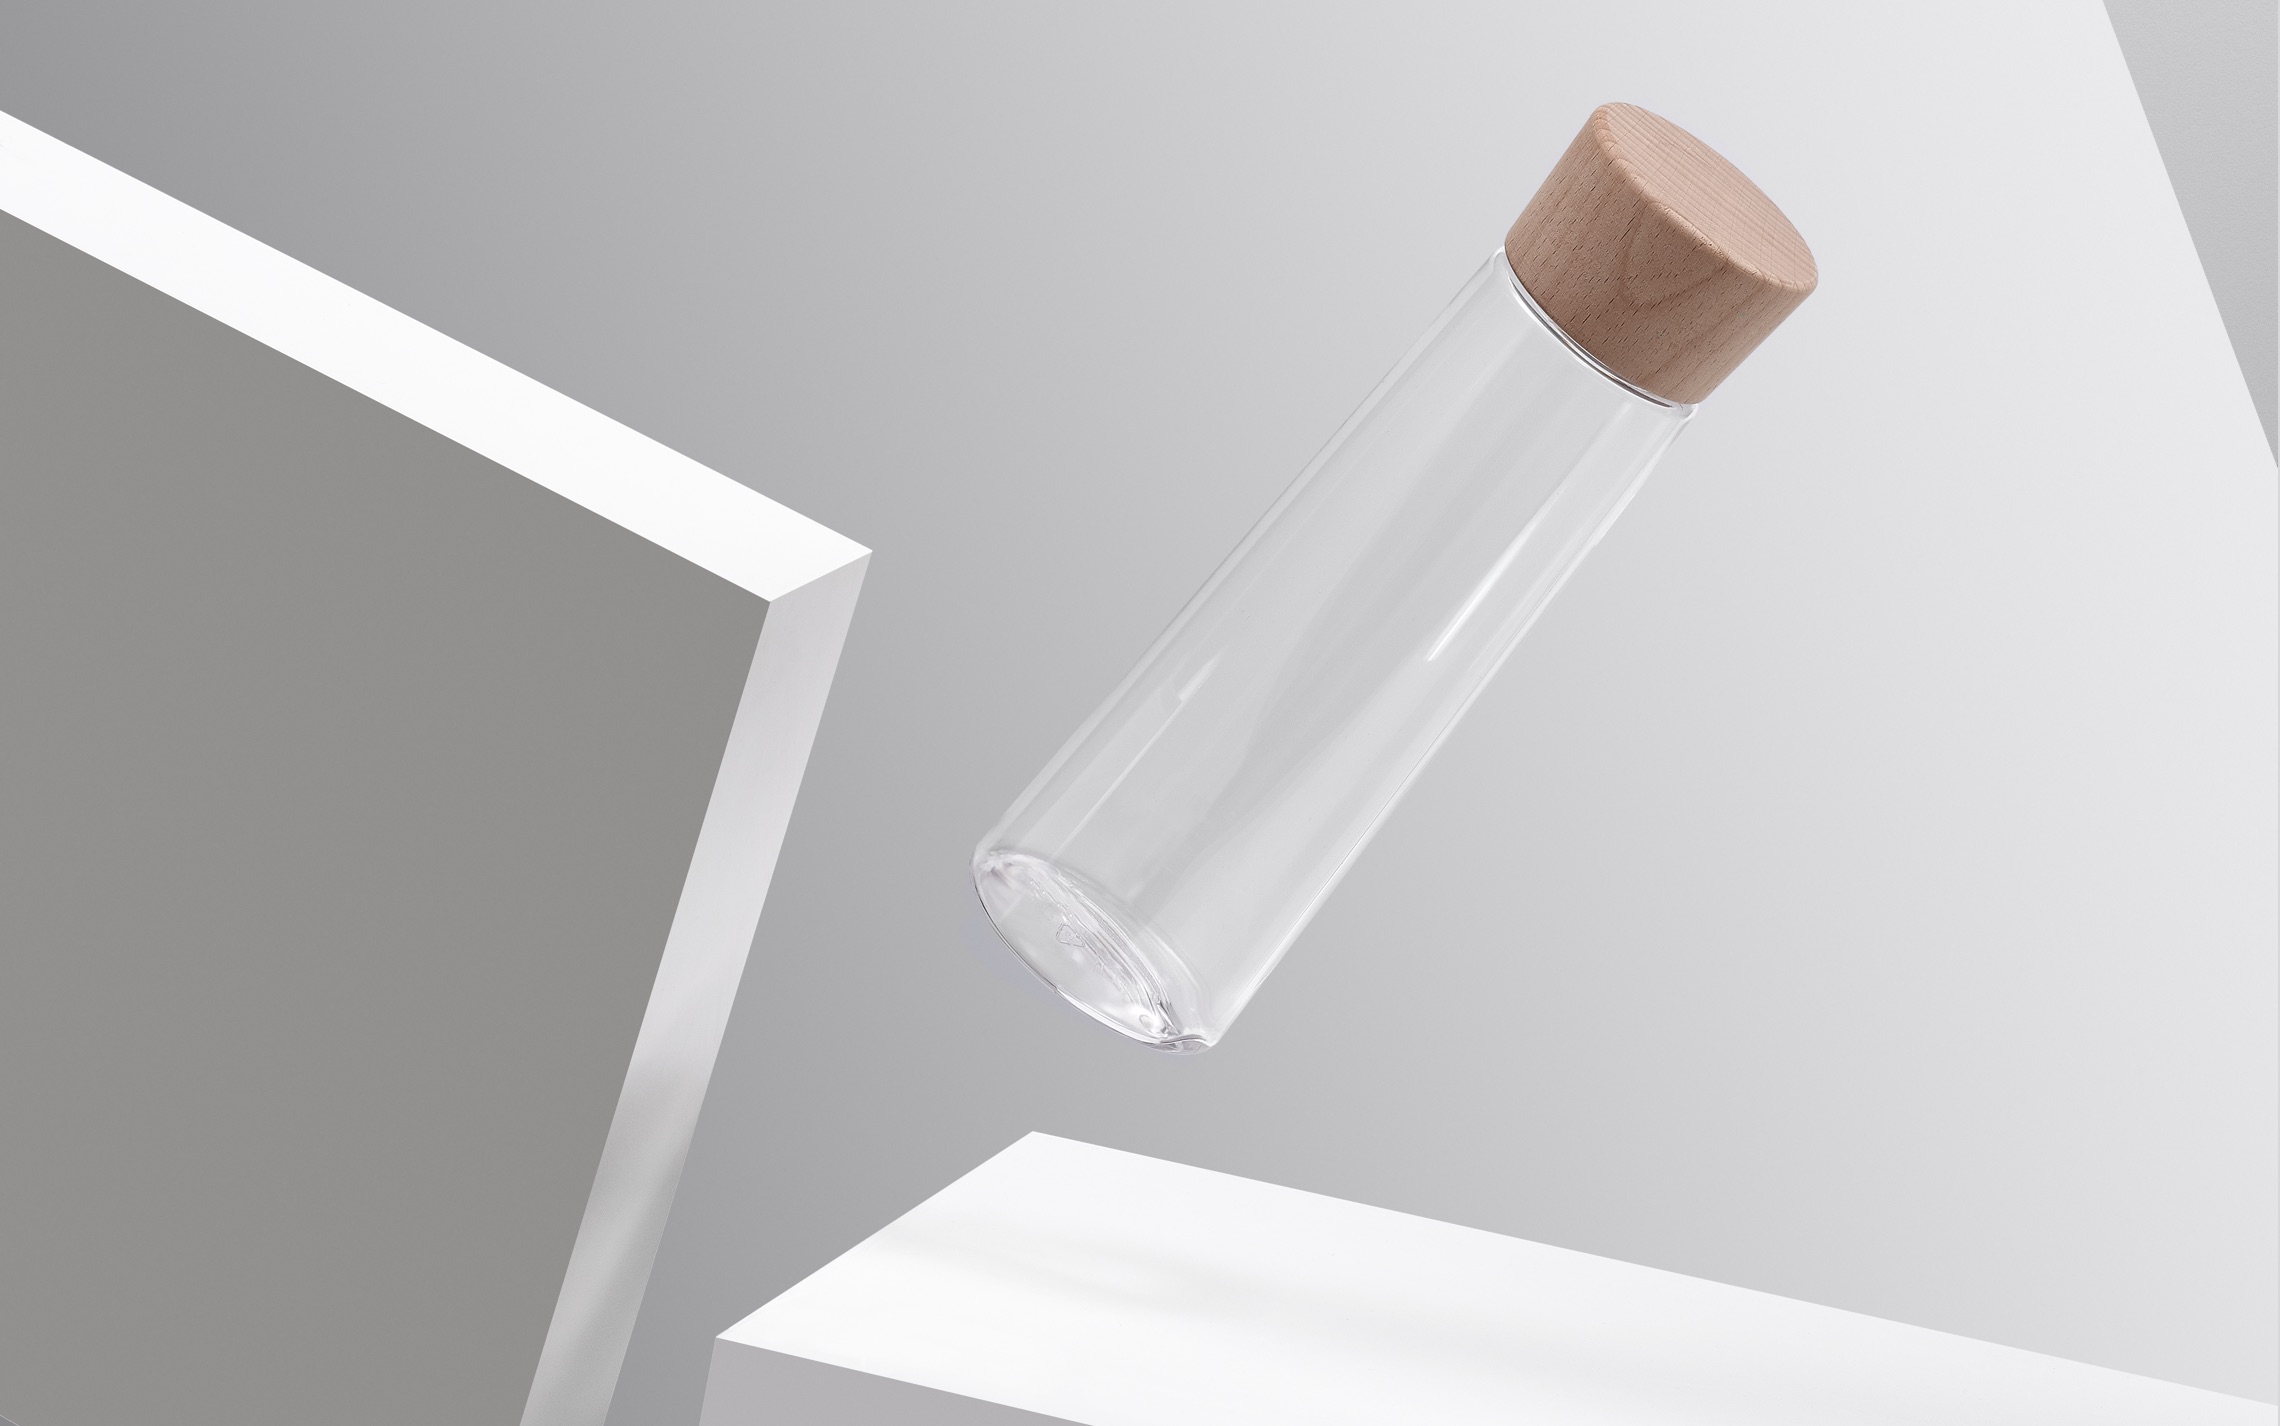 The FLOW drinking bottle embodies purism in its most beautiful form.